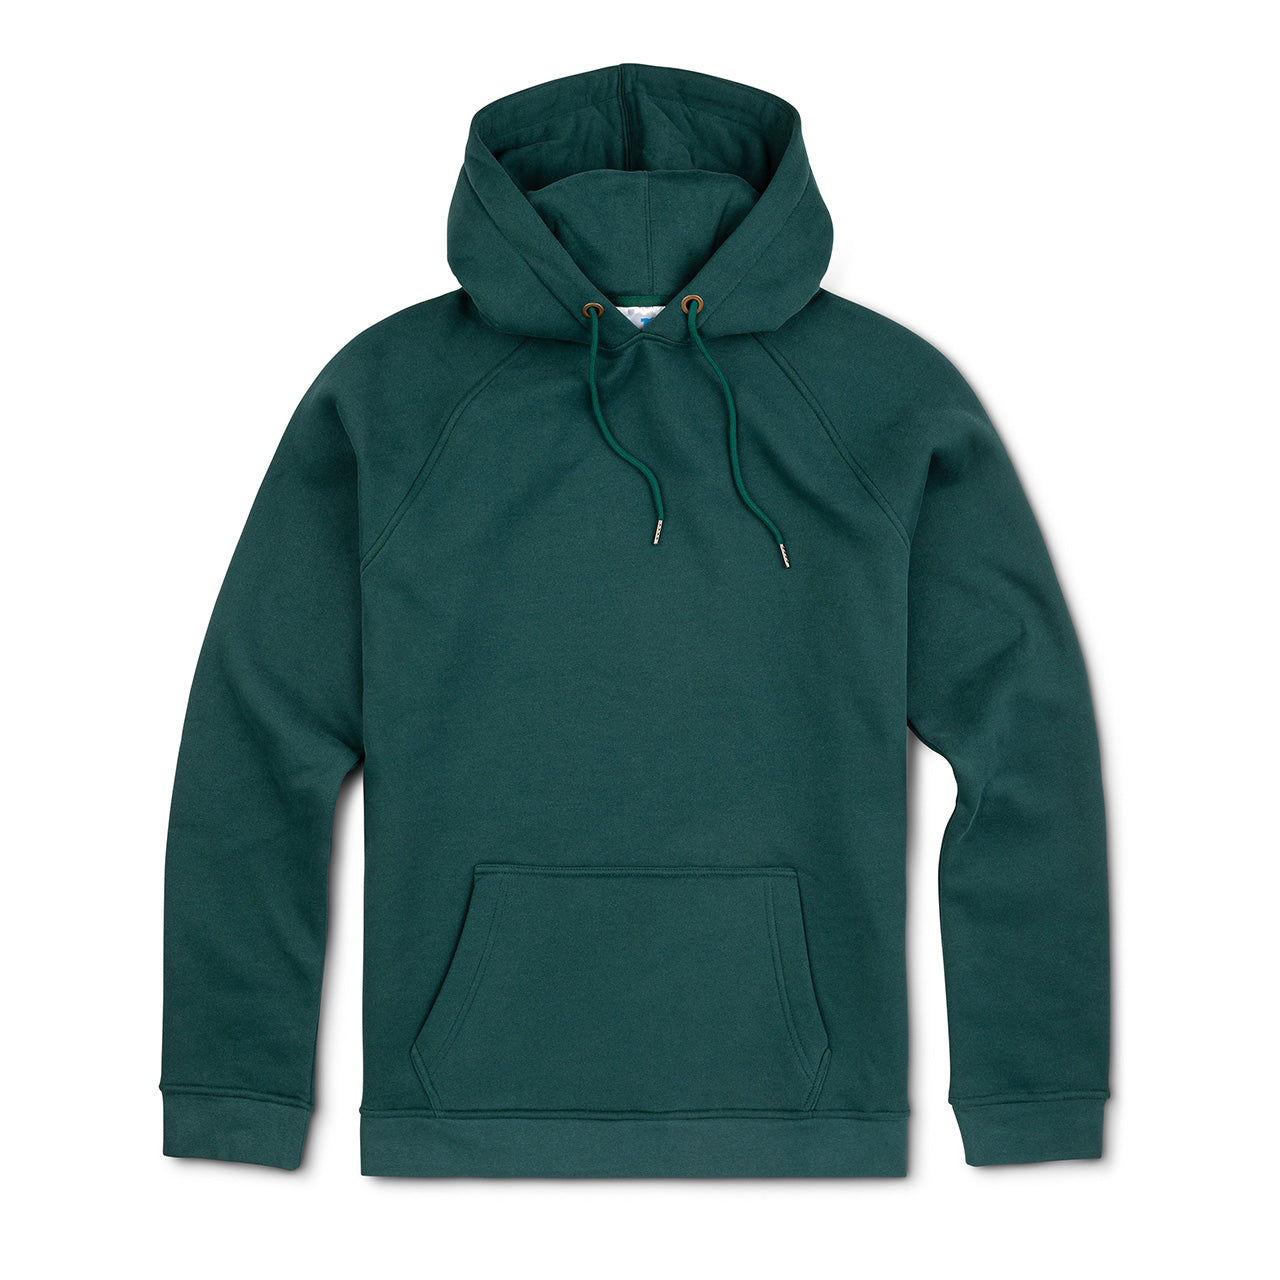 Green Pullover Hodie for Tall Slim Men